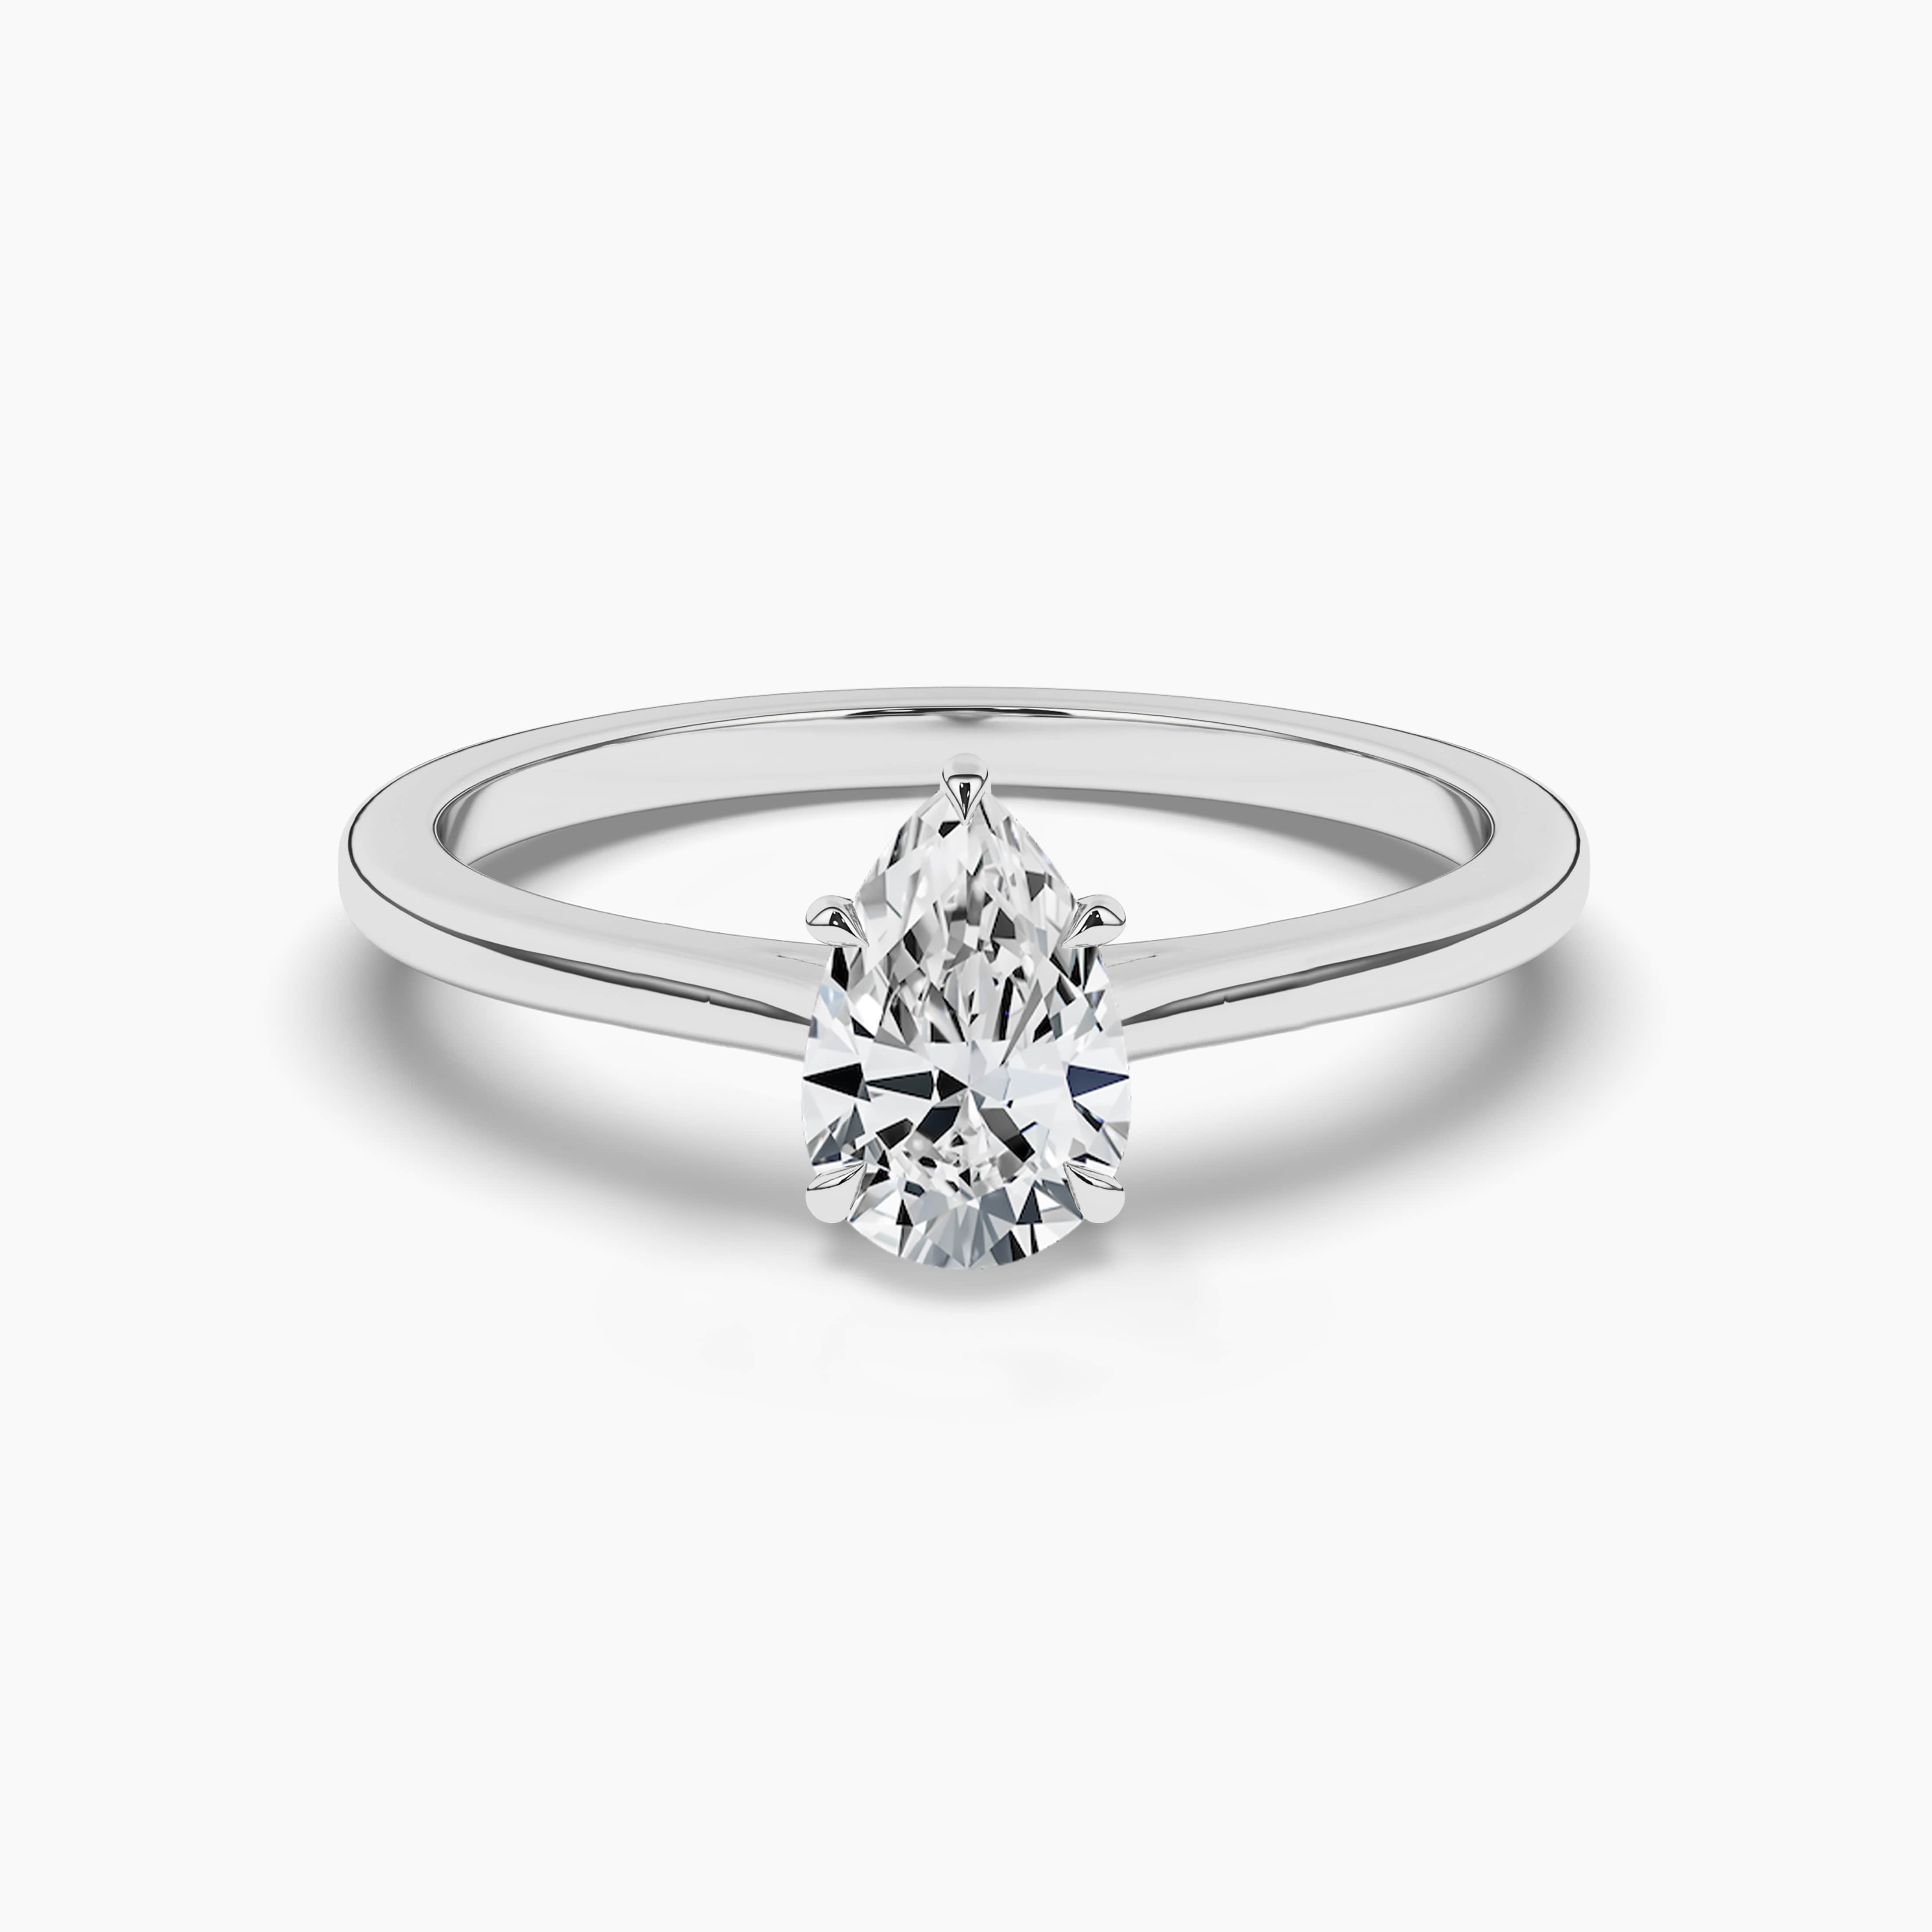 Solitaire Pear-Cut Engagement Ring in White Gold